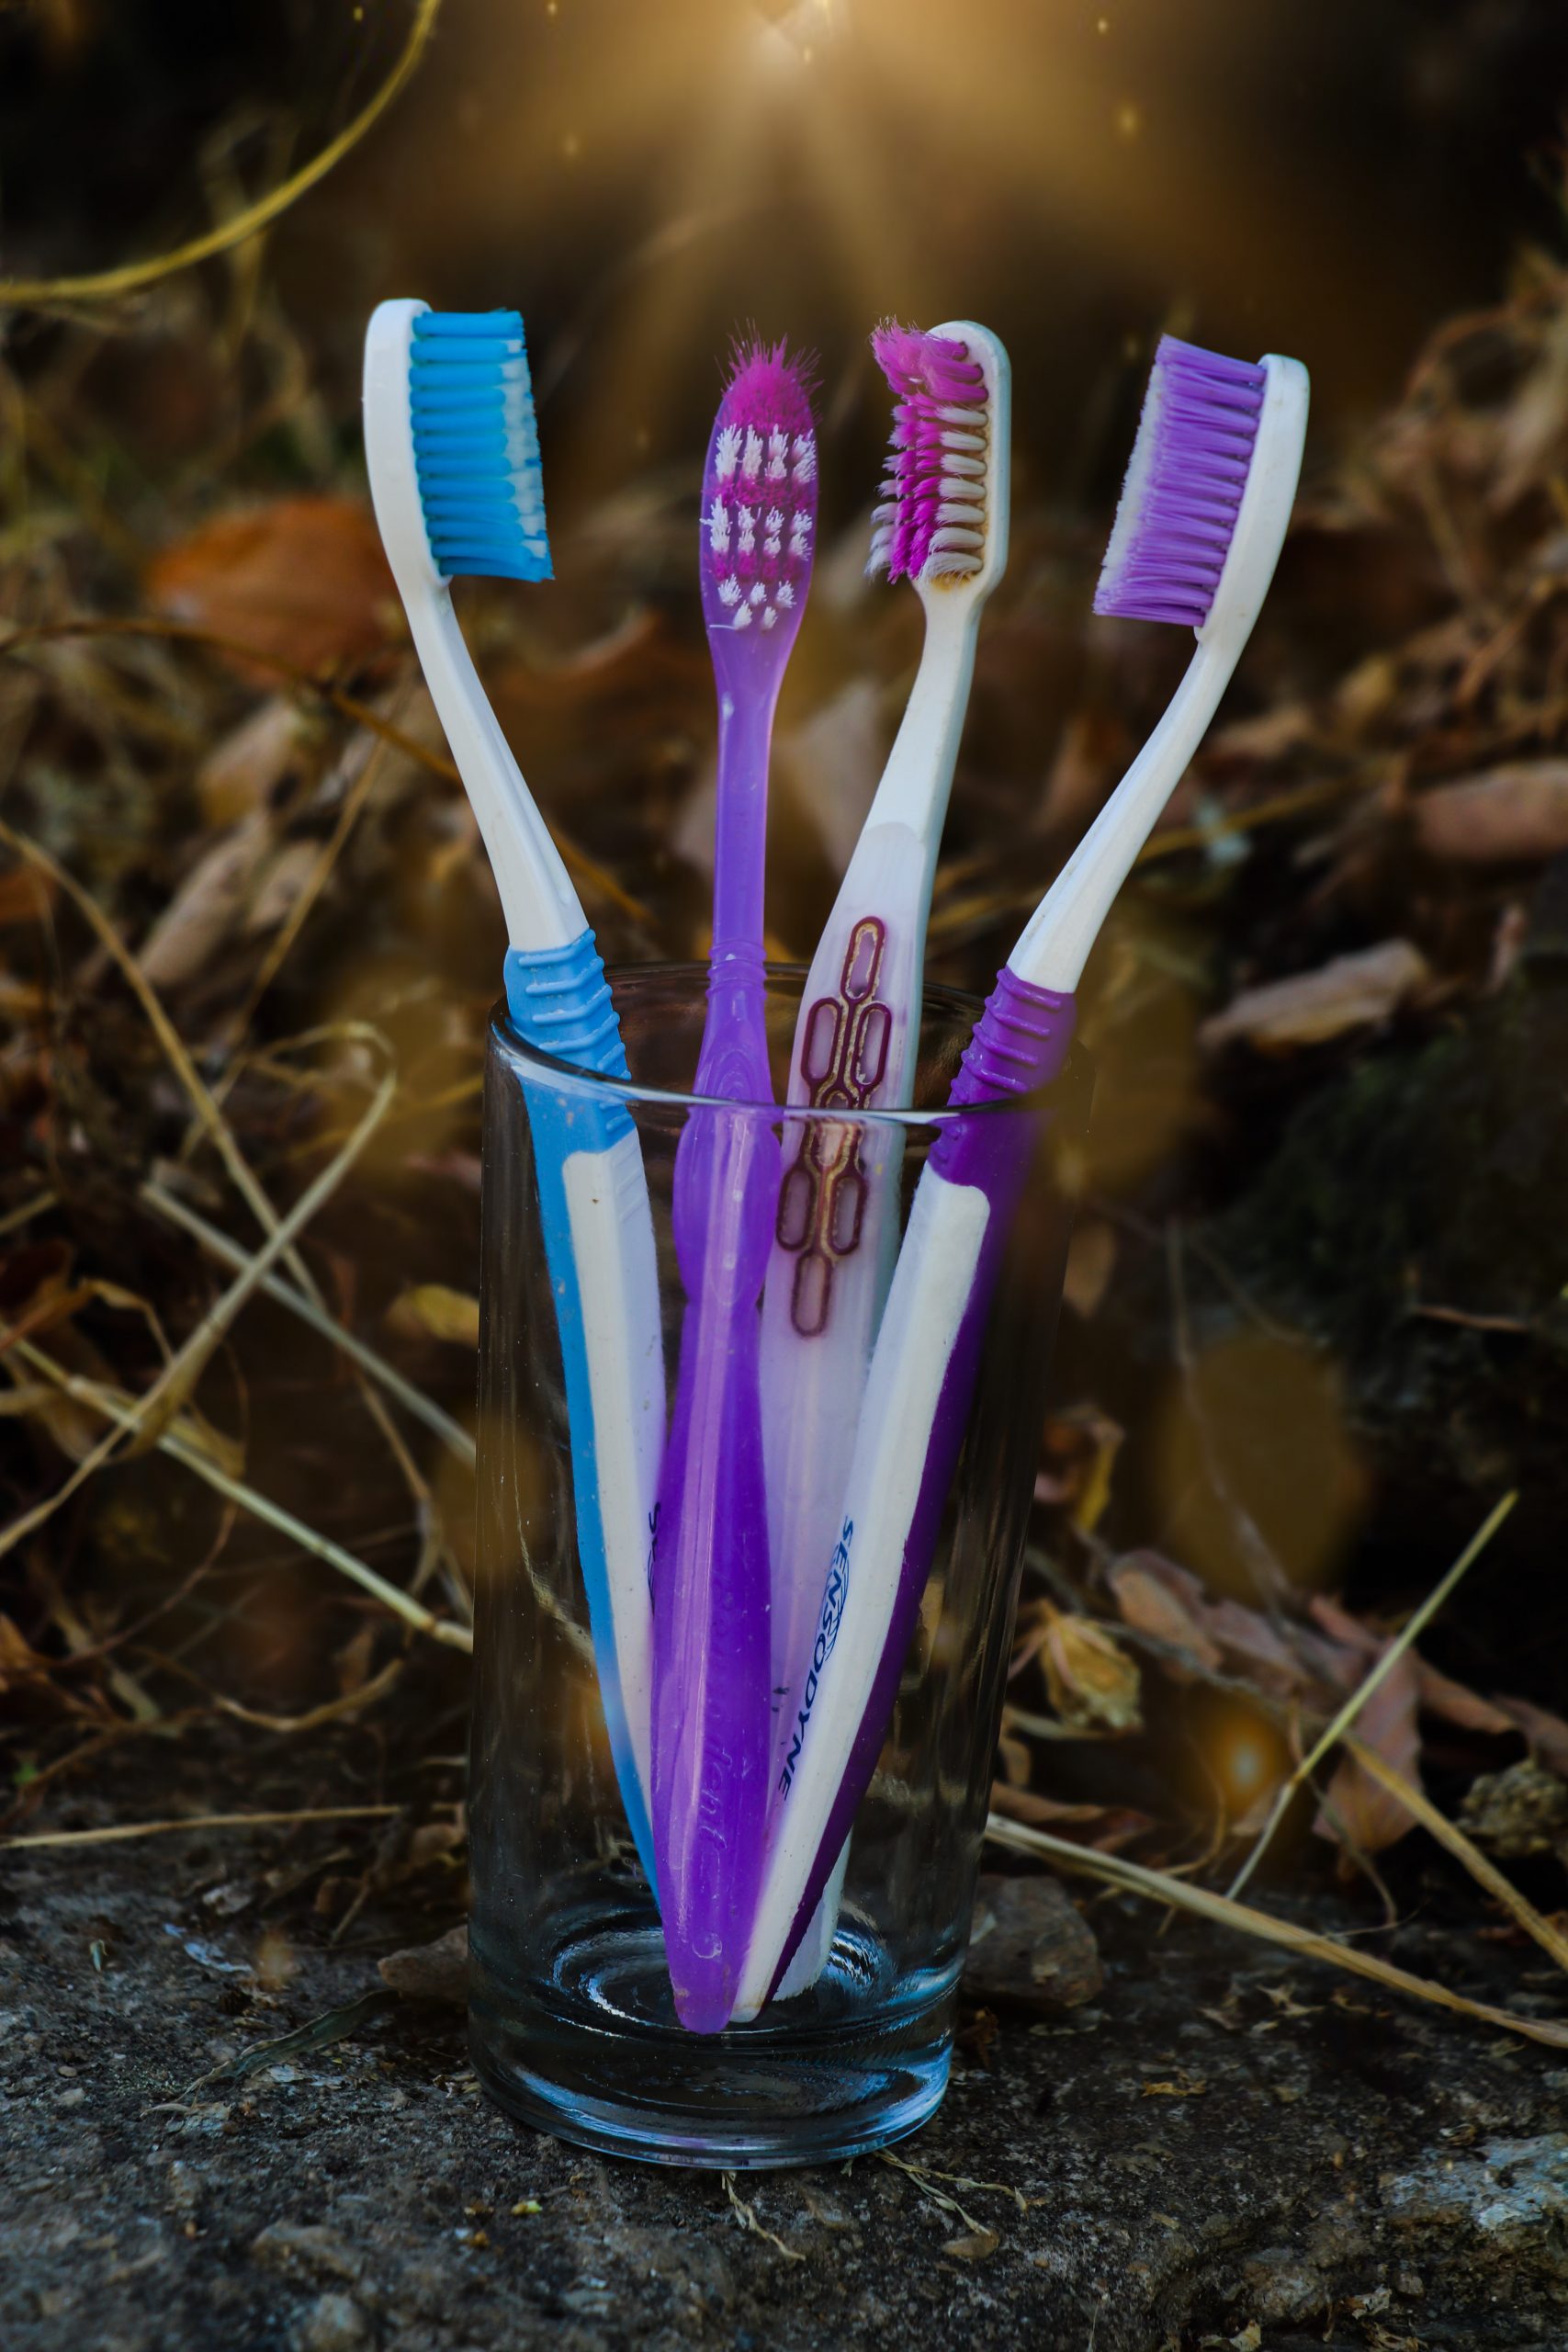 Tooth brushes in a glass